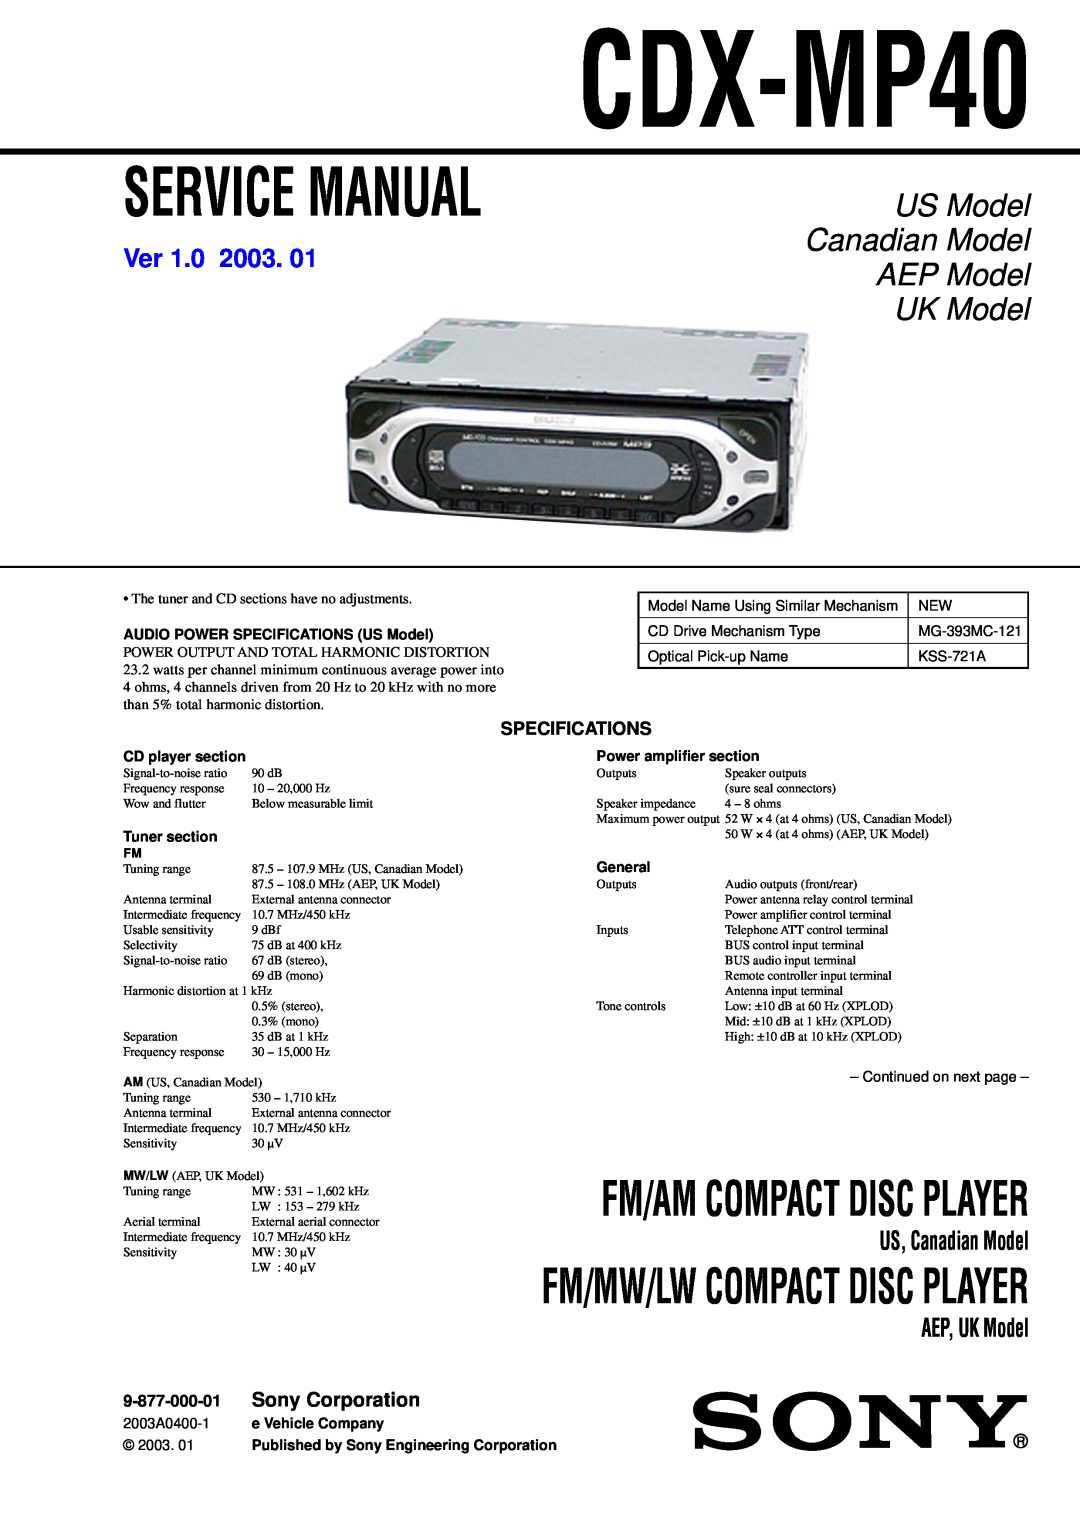 Sony CDX-MP40 service manual Specifications, US Model, Canadian Model, AEP Model, UK Model, Fm/Am Compact Disc Player, Ver 